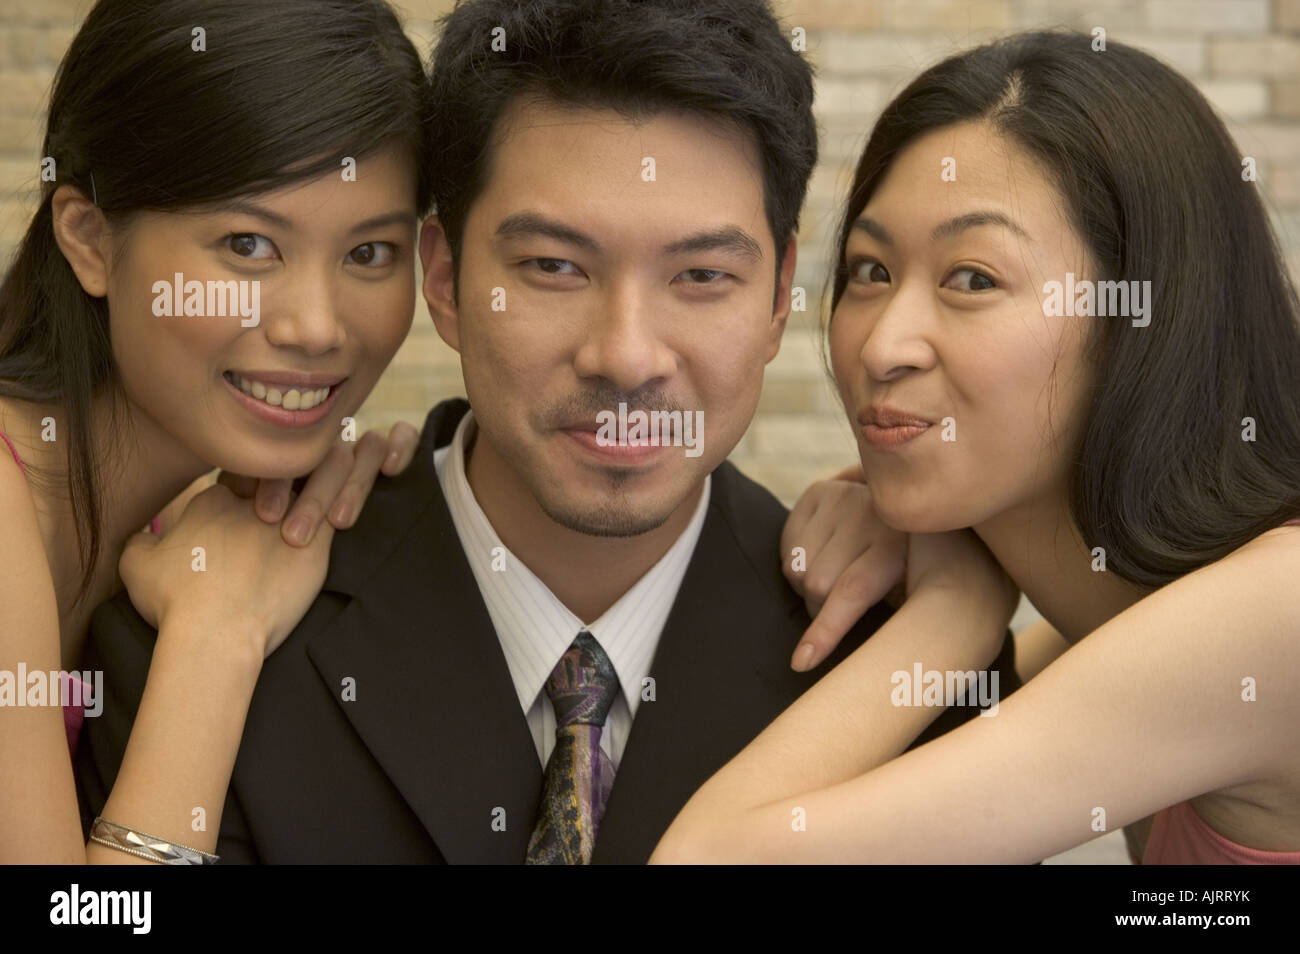 Portrait of a young man and two young women smiling Stock Photo